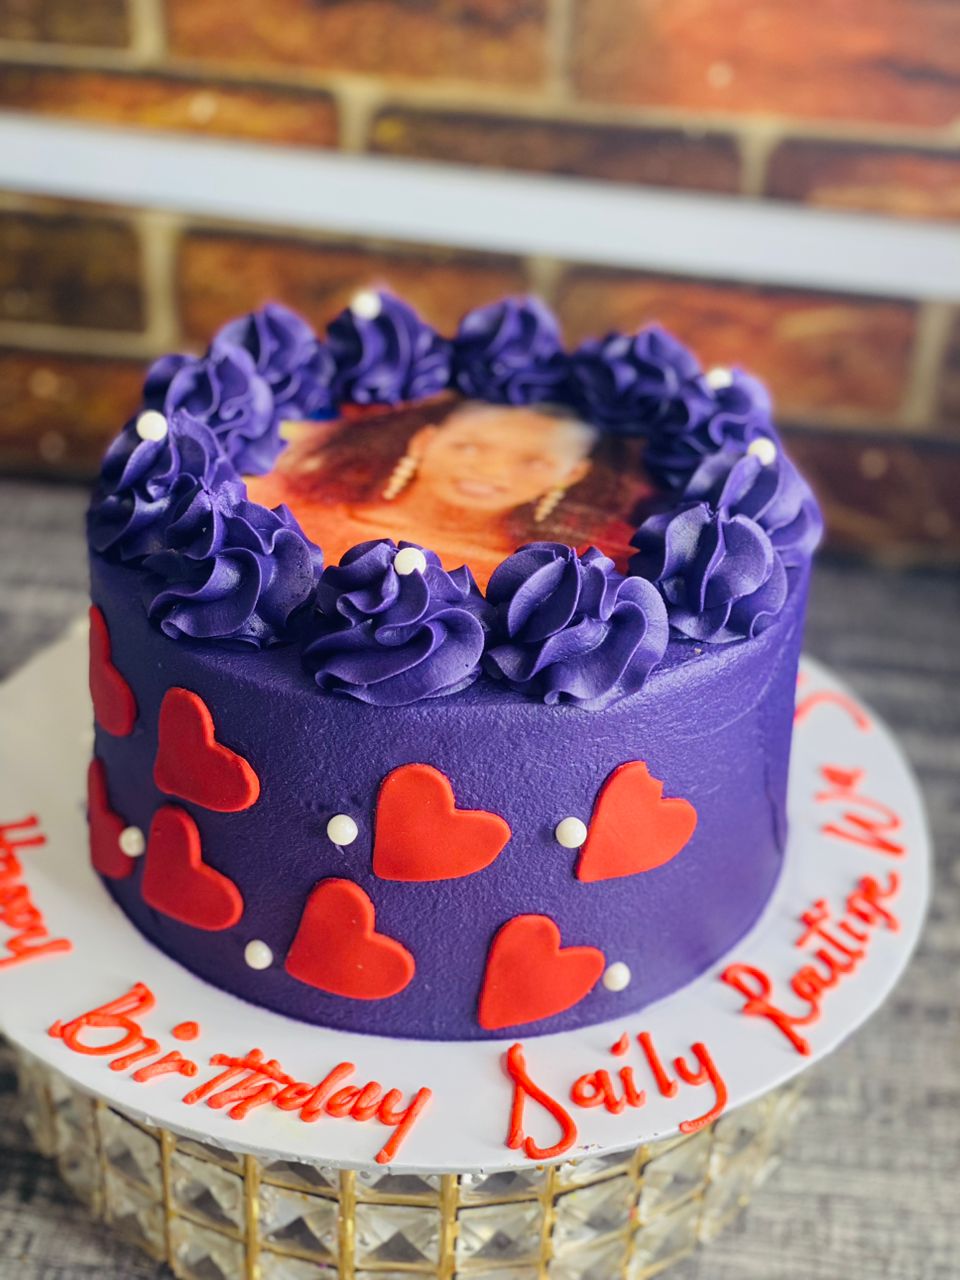 BIRTHDAY CAKES WITH EDIBLE 